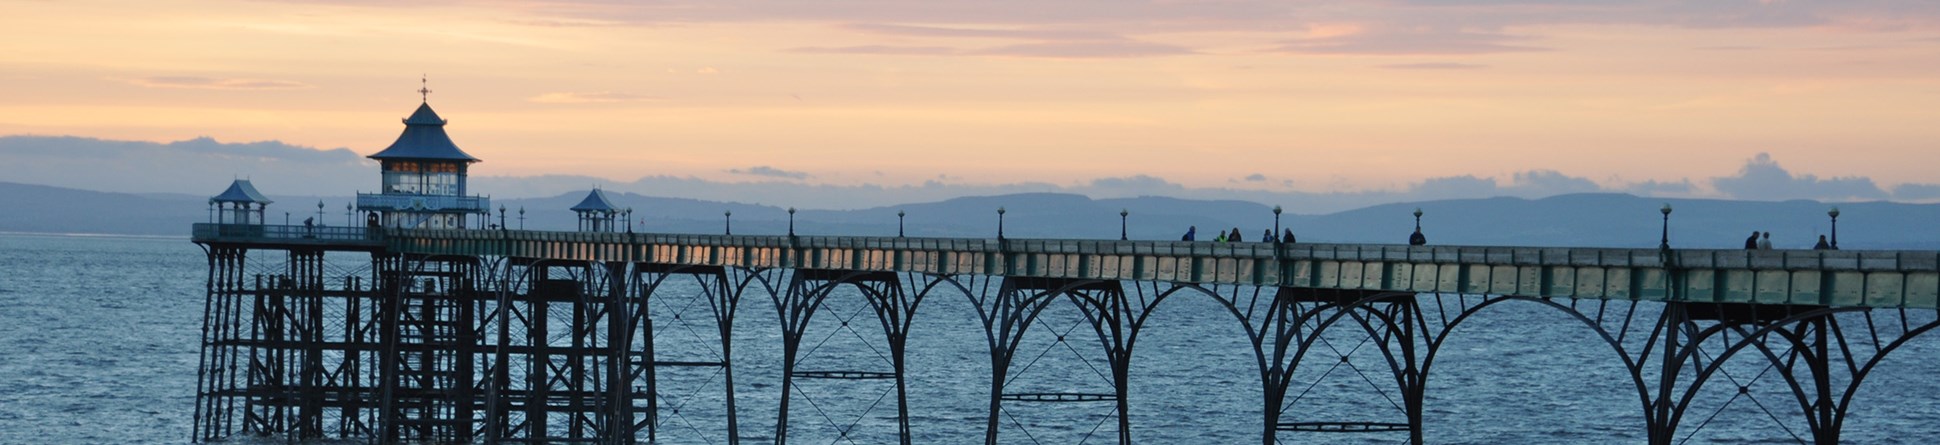 A photo of Clevedon Pier at sunset